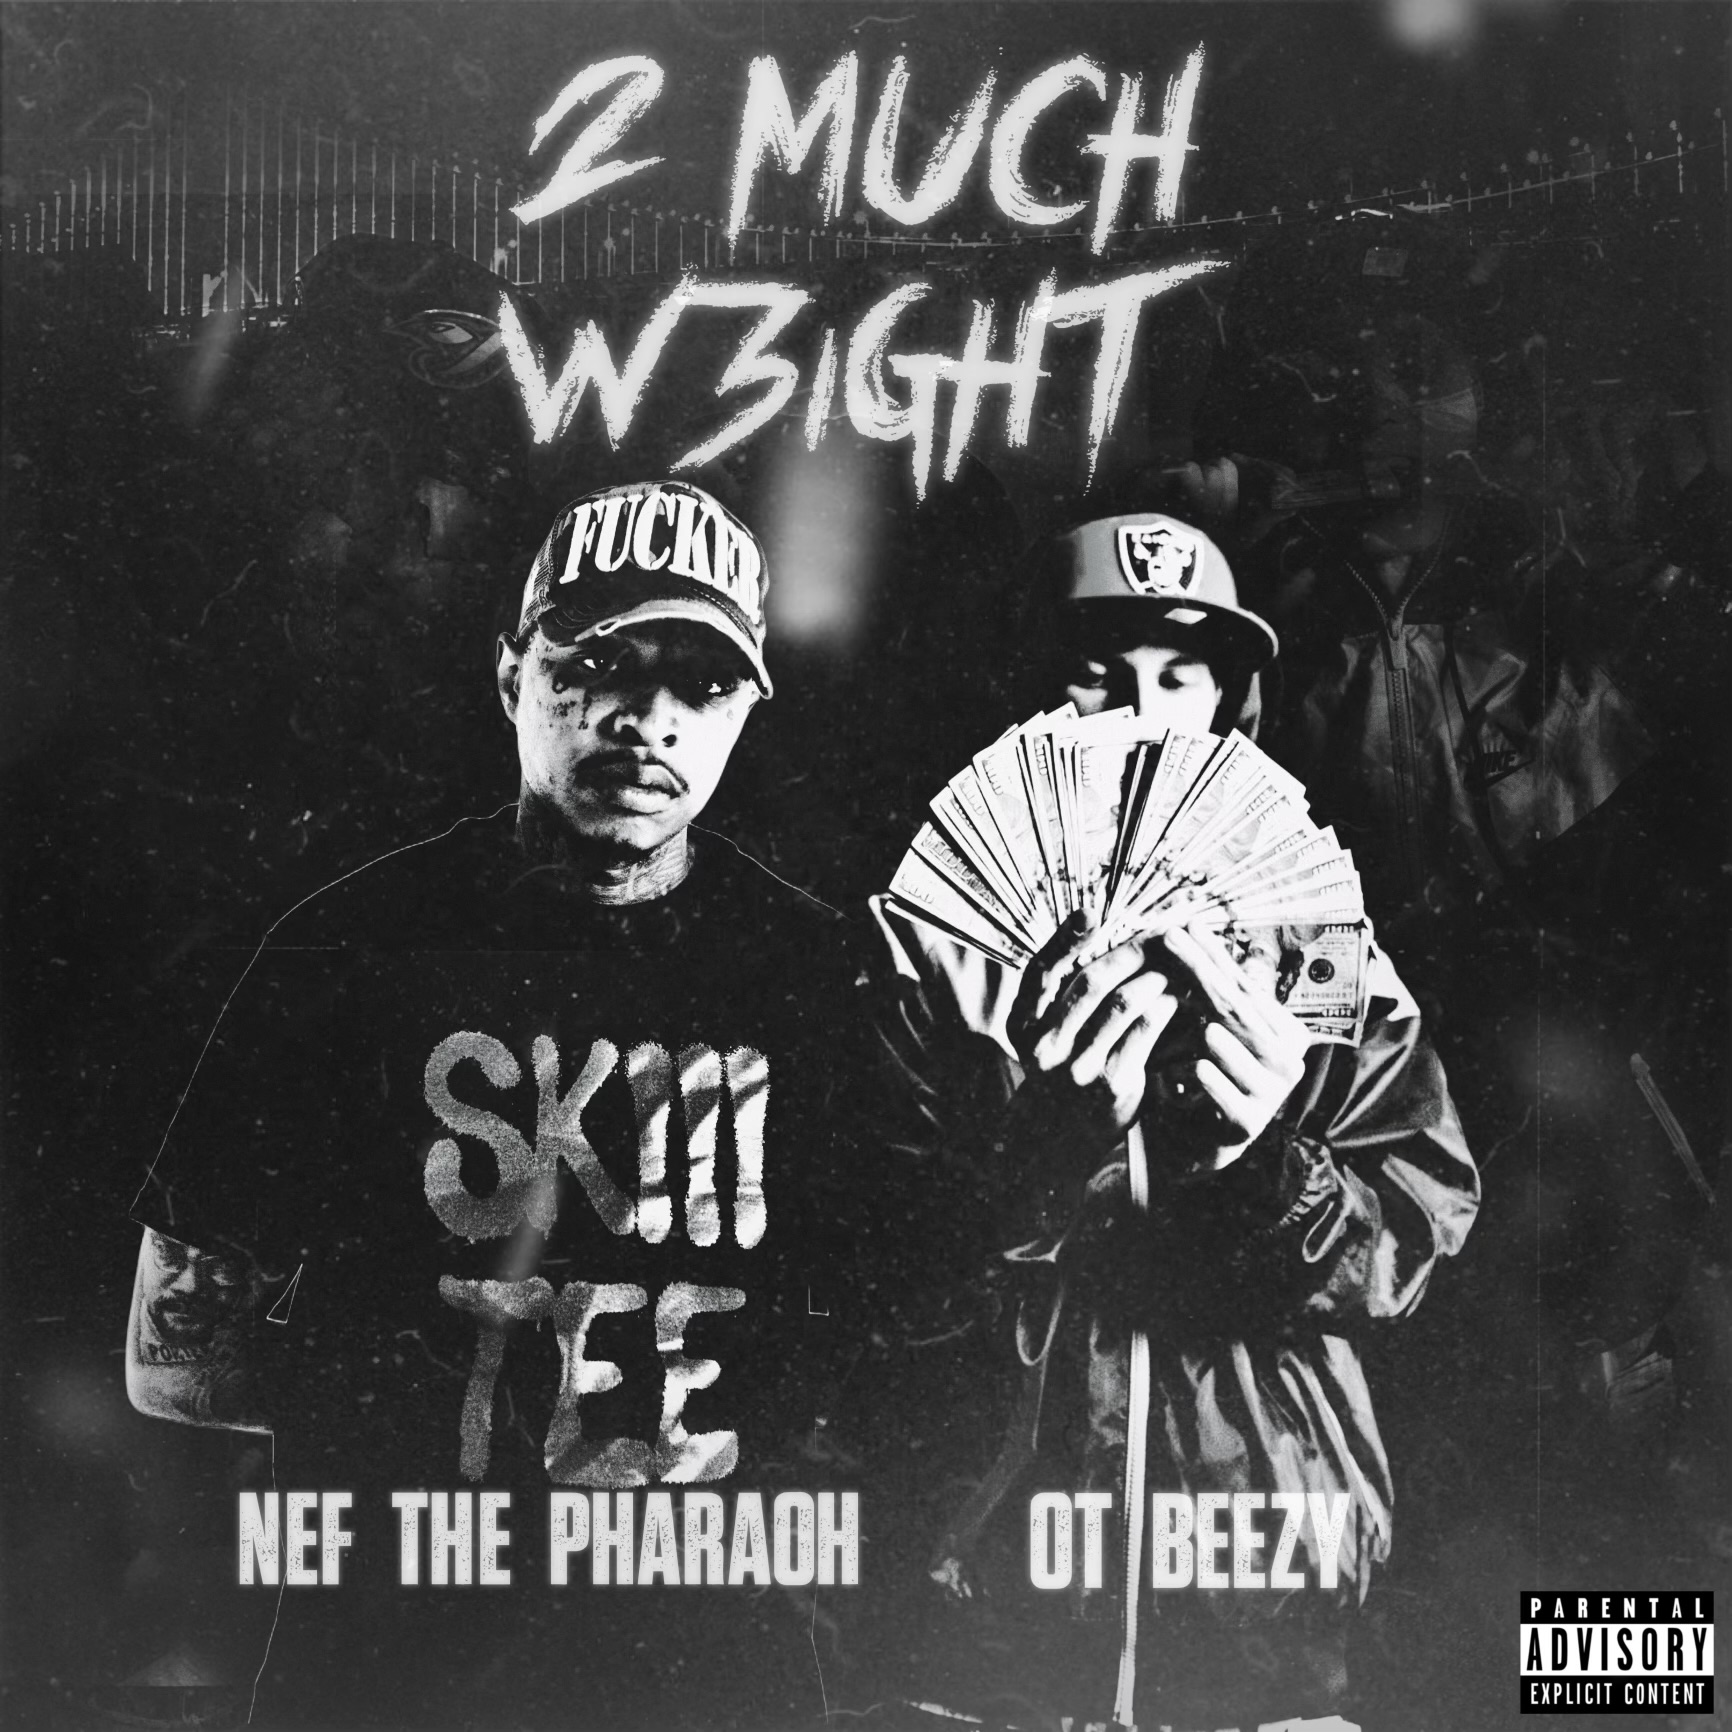 OTBeezy & Nef The Pharaoh - 2 MUCH W3IGHT Cover Art